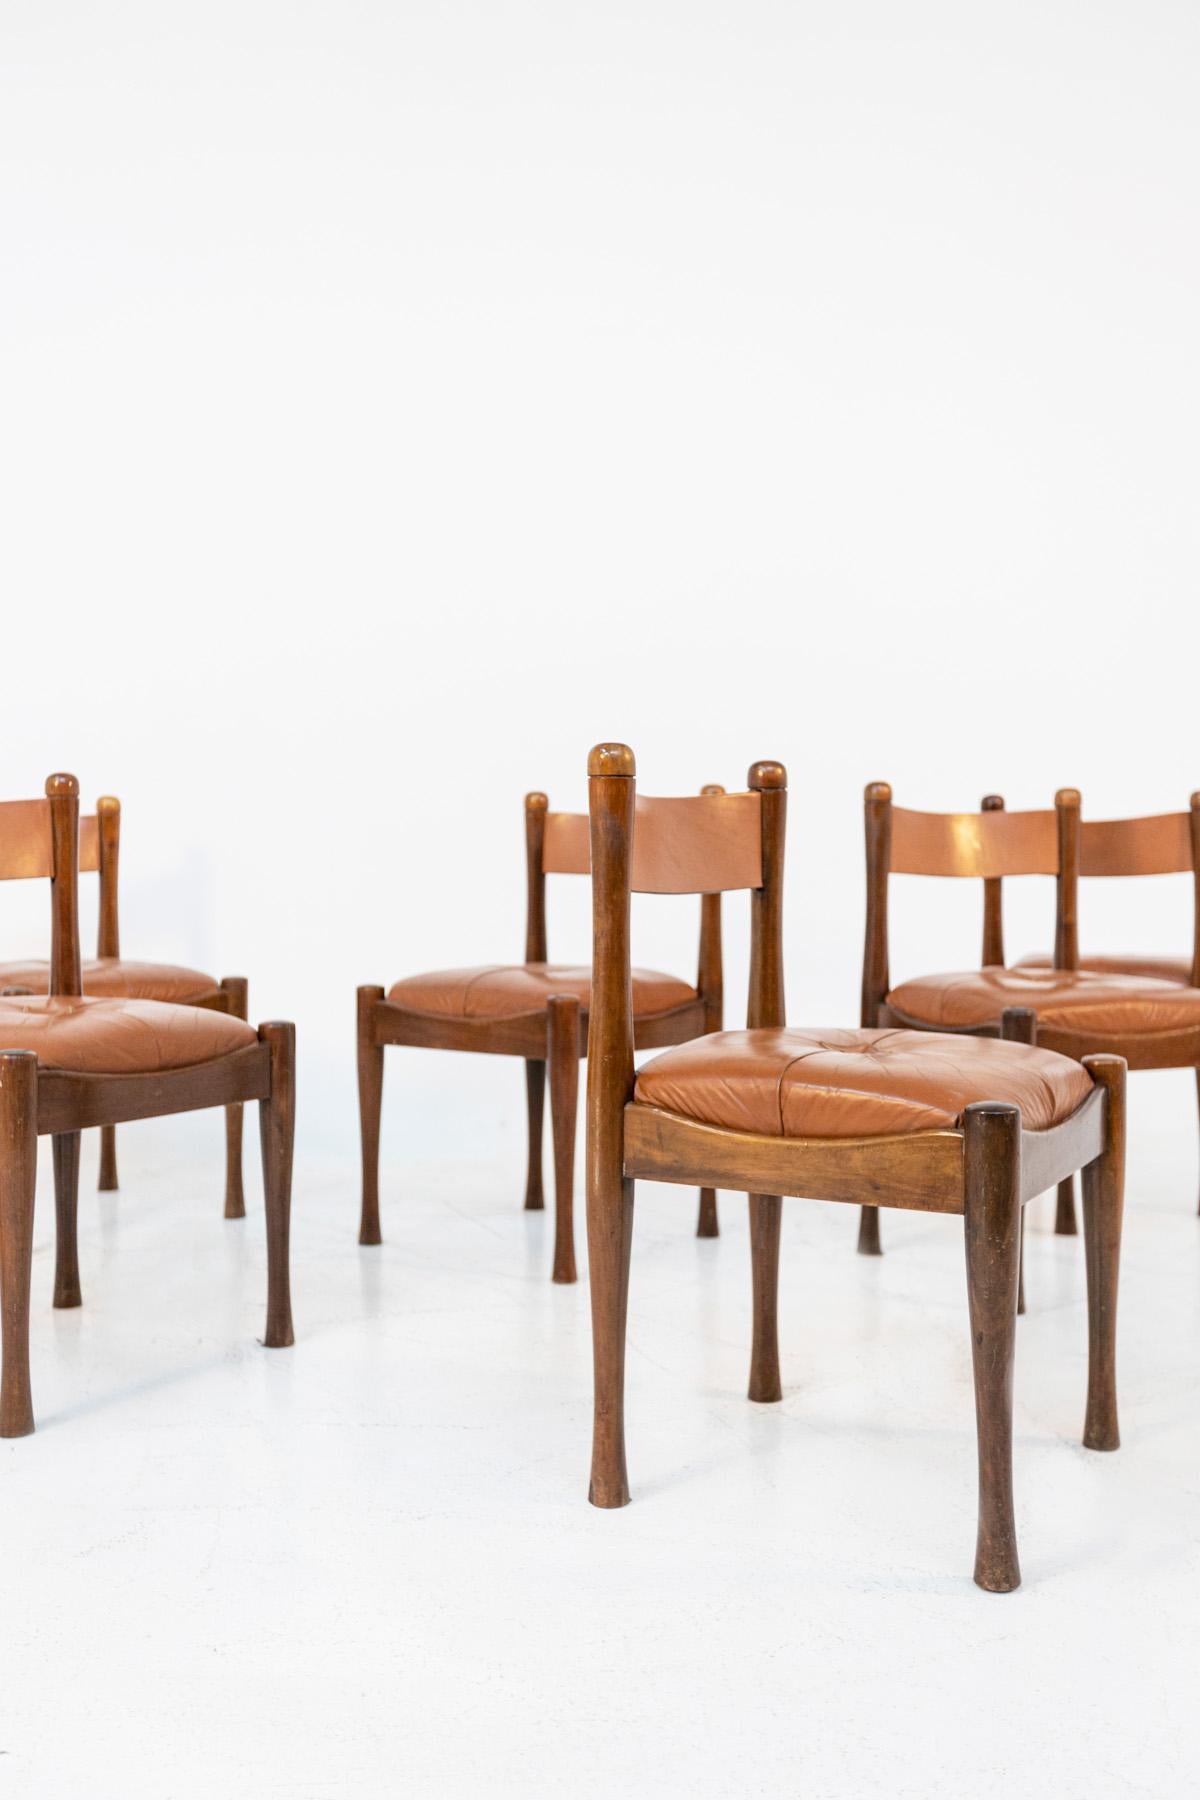 Italian Silvio Coppola for Bernini Rare Set of Eight Chairs in Wood and Brown Leather